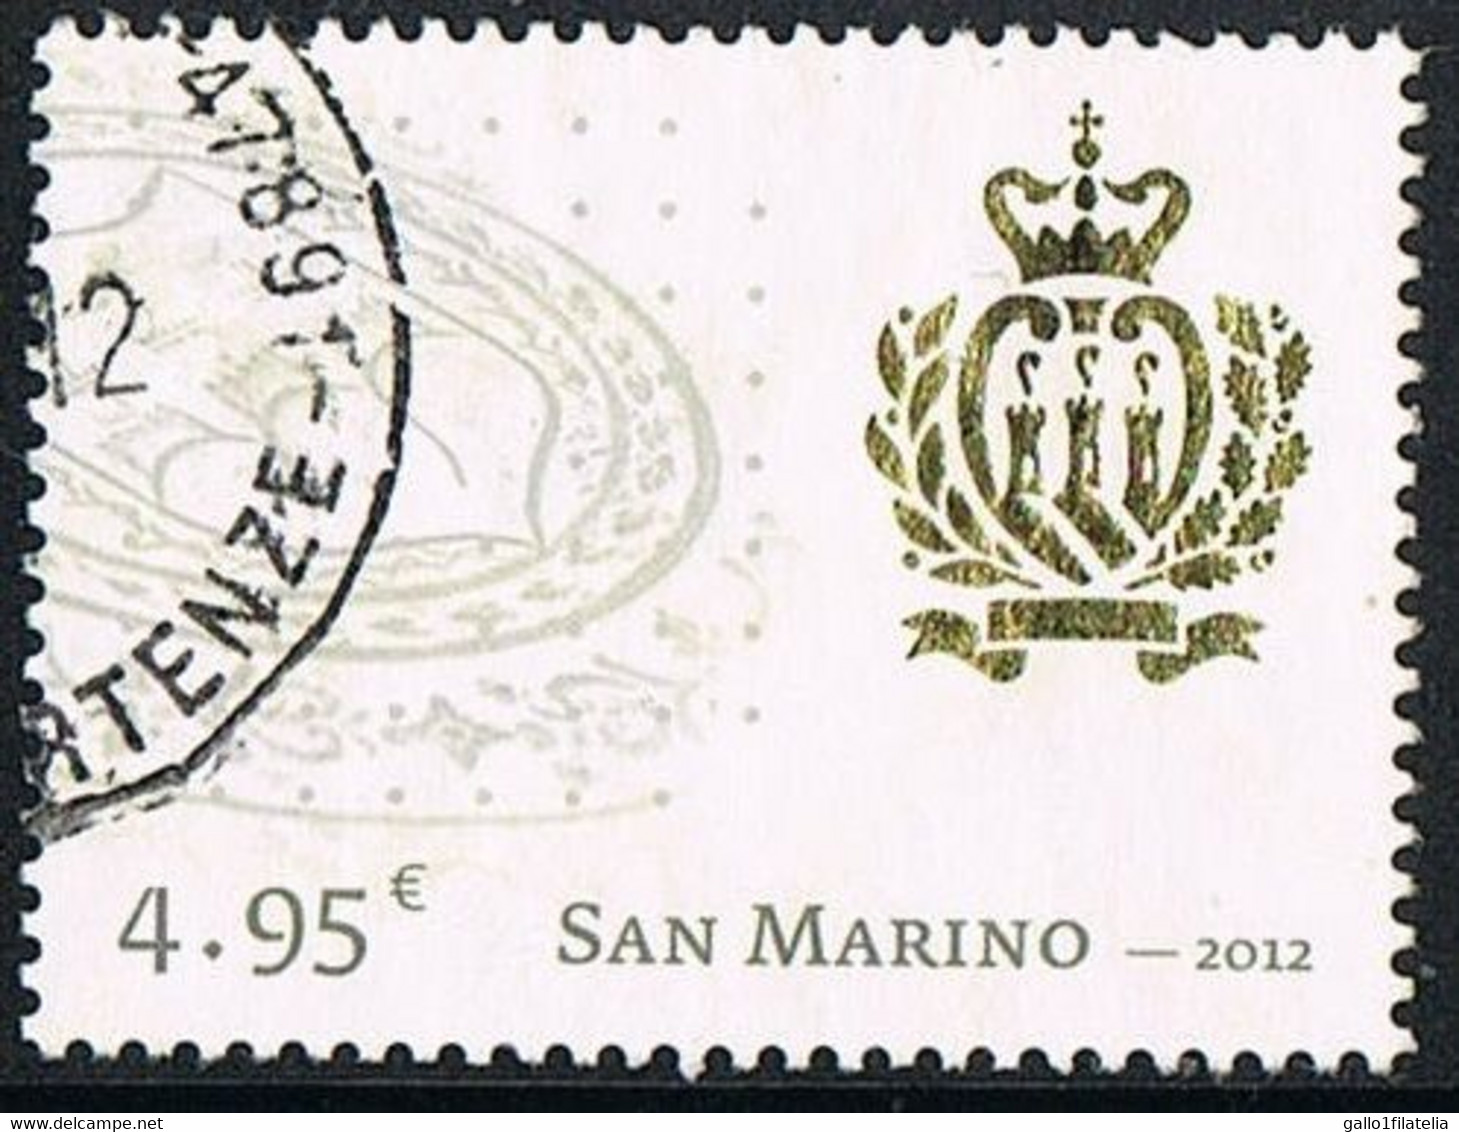 2012 - SAN MARINO - TRIBUTO ALLO STEMMA - TRIBUTE TO THE COAT OF ARMS - USED - Used Stamps